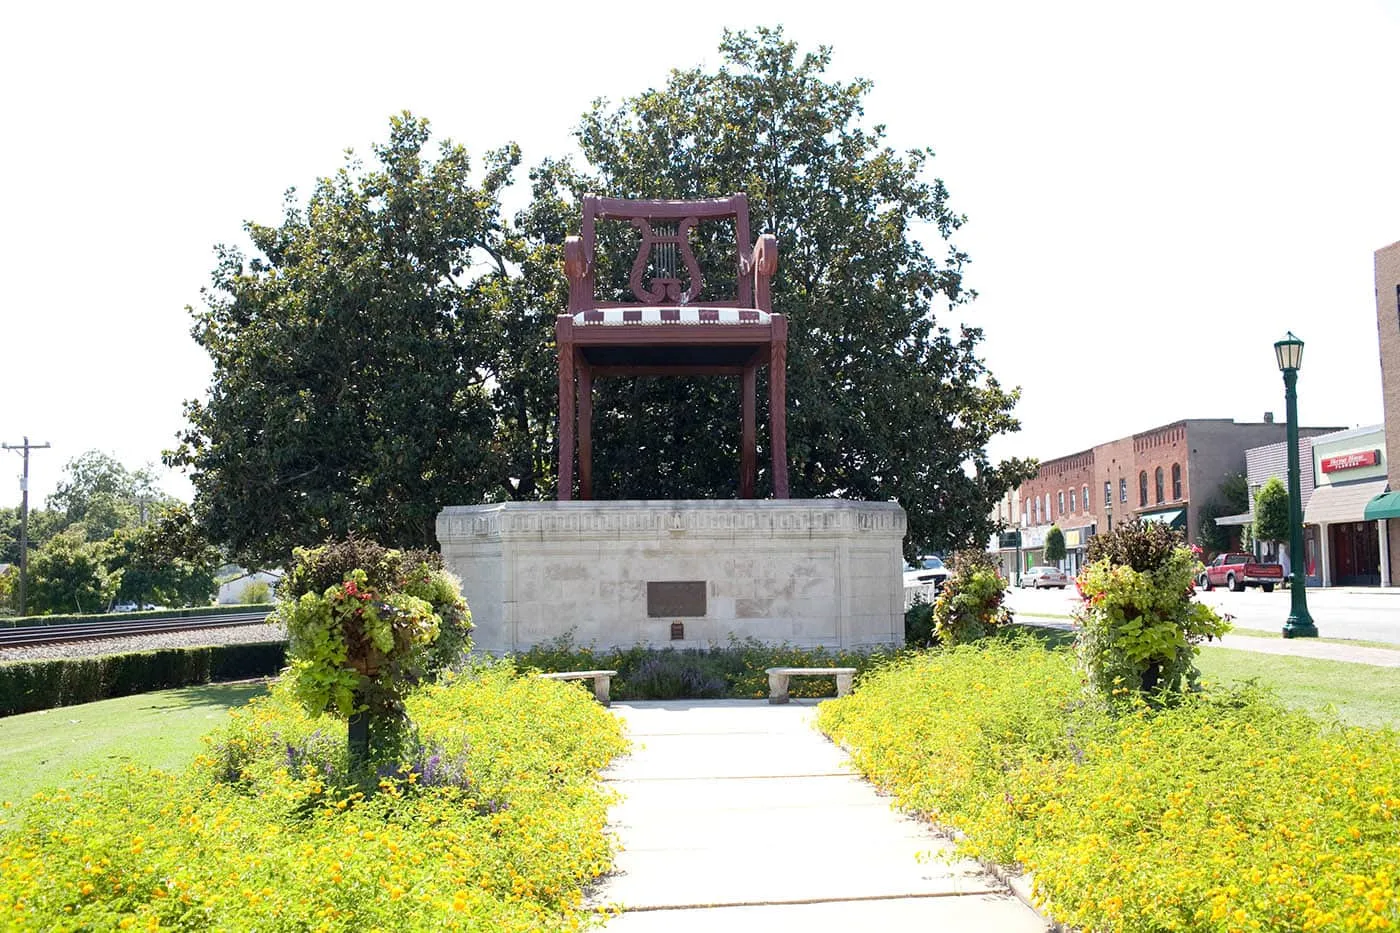 World's Largest Duncan Phyfe Chair in Thomasville, North Carolina